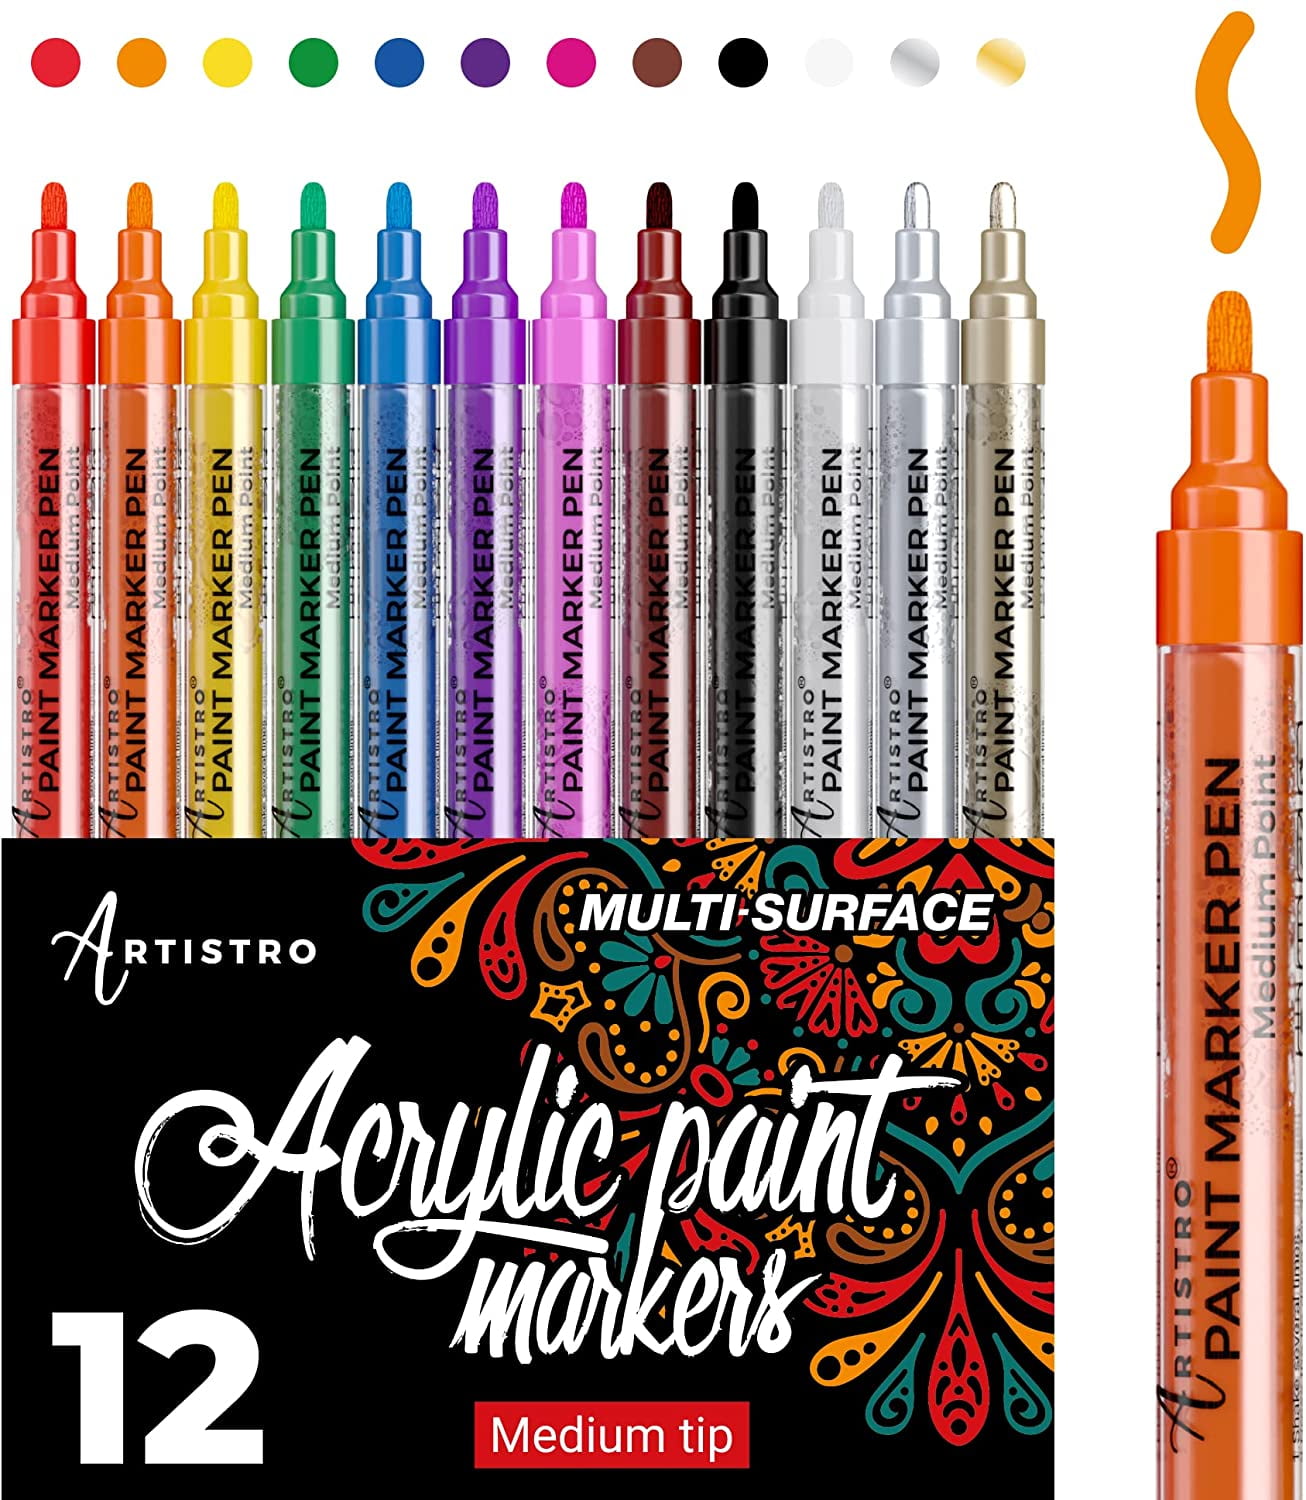 60 Artistro Markers for Art | 30 Acrylic Extra Fine Tip Paint Pens + 30 Acrylic Medium Tip Paint Pens for Rock, Wood, Glass, Ceramic, Metal Painting